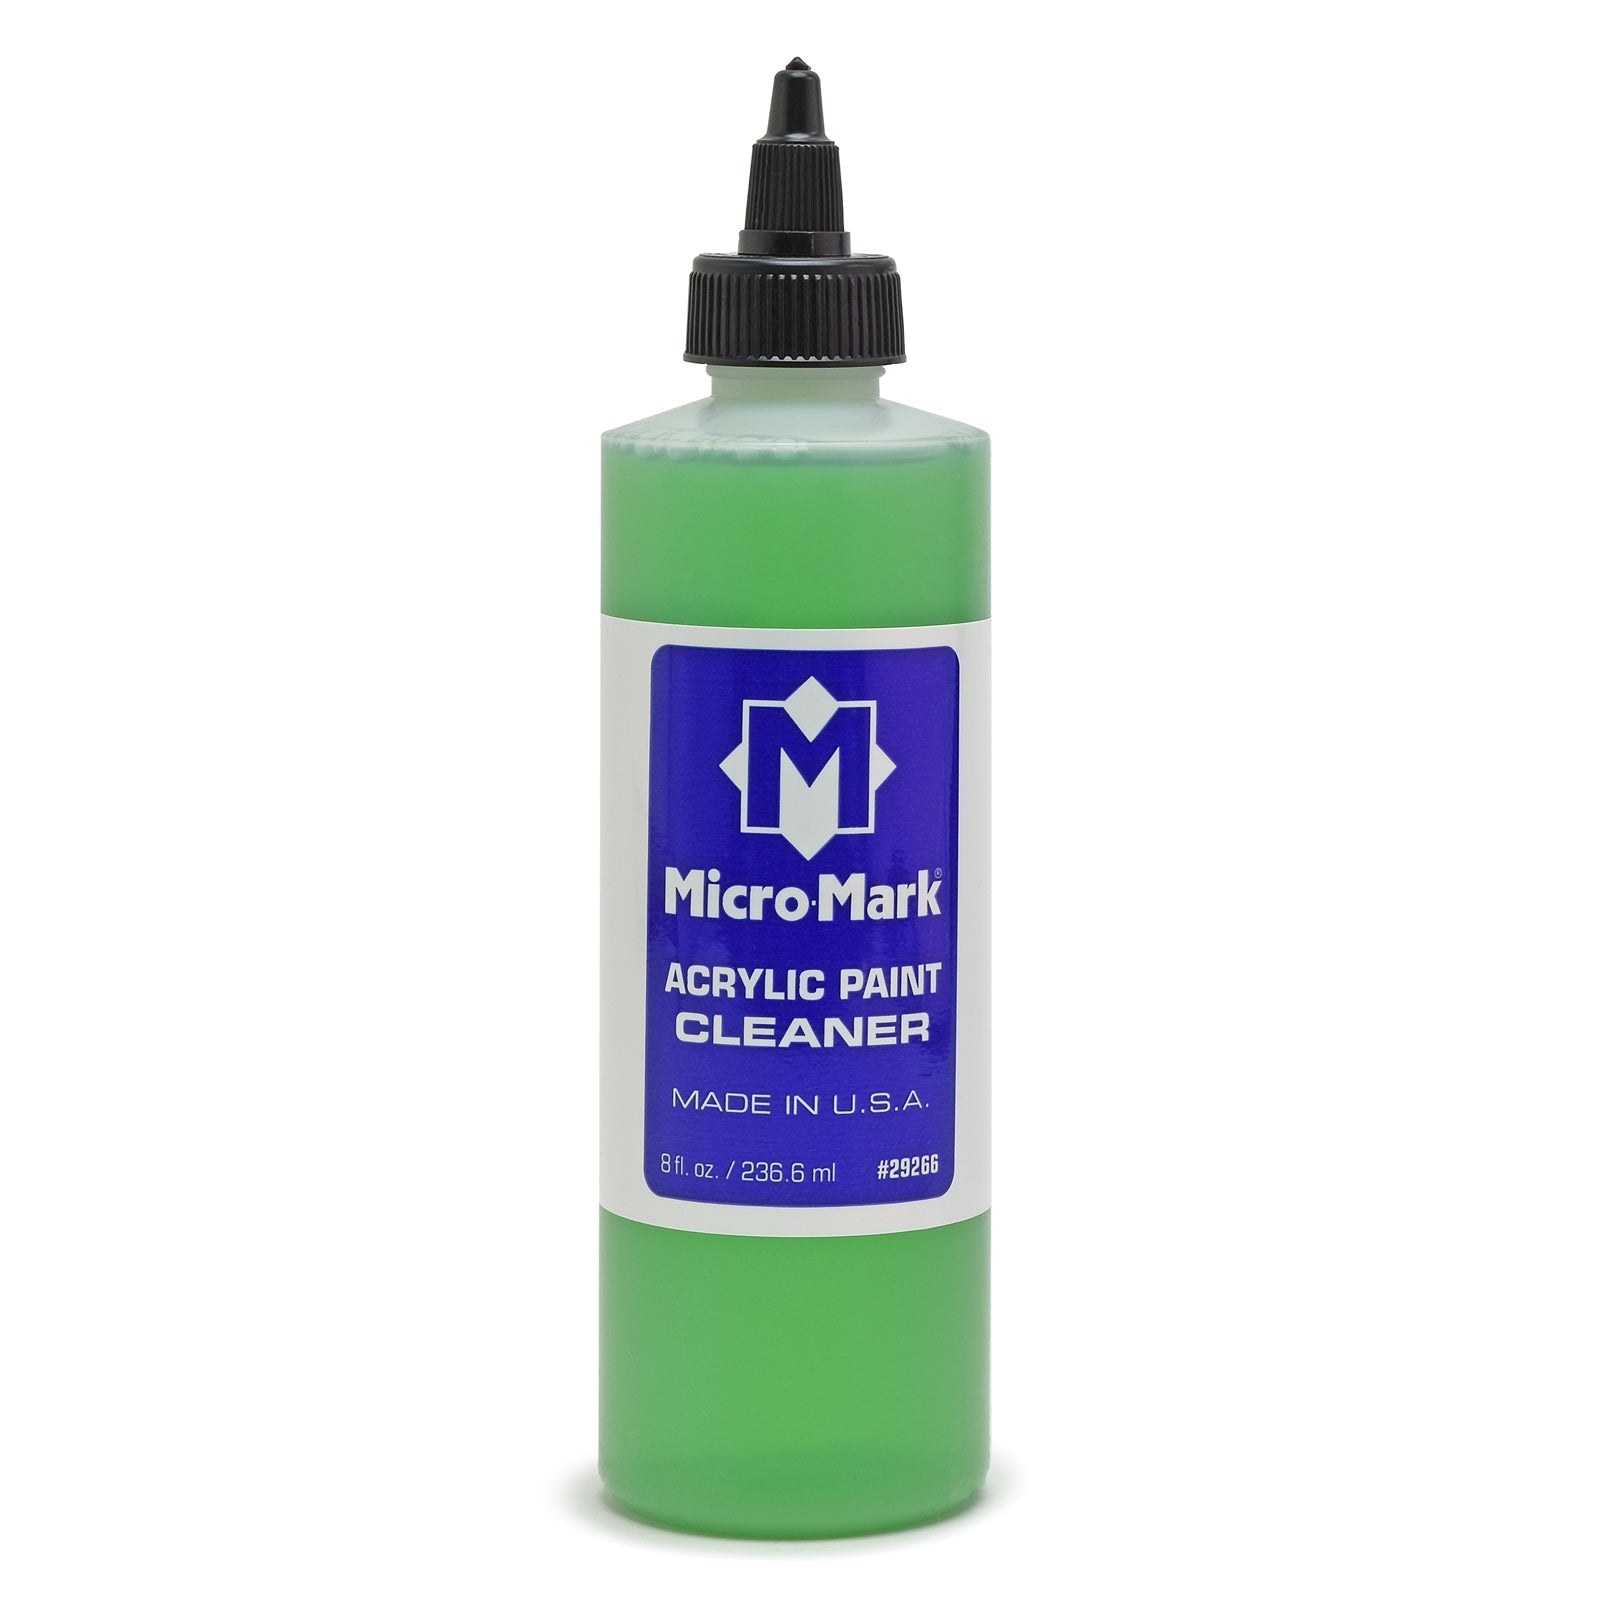 Micro - Mark Acrylic Paint Cleaner - Micro - Mark Cleaners